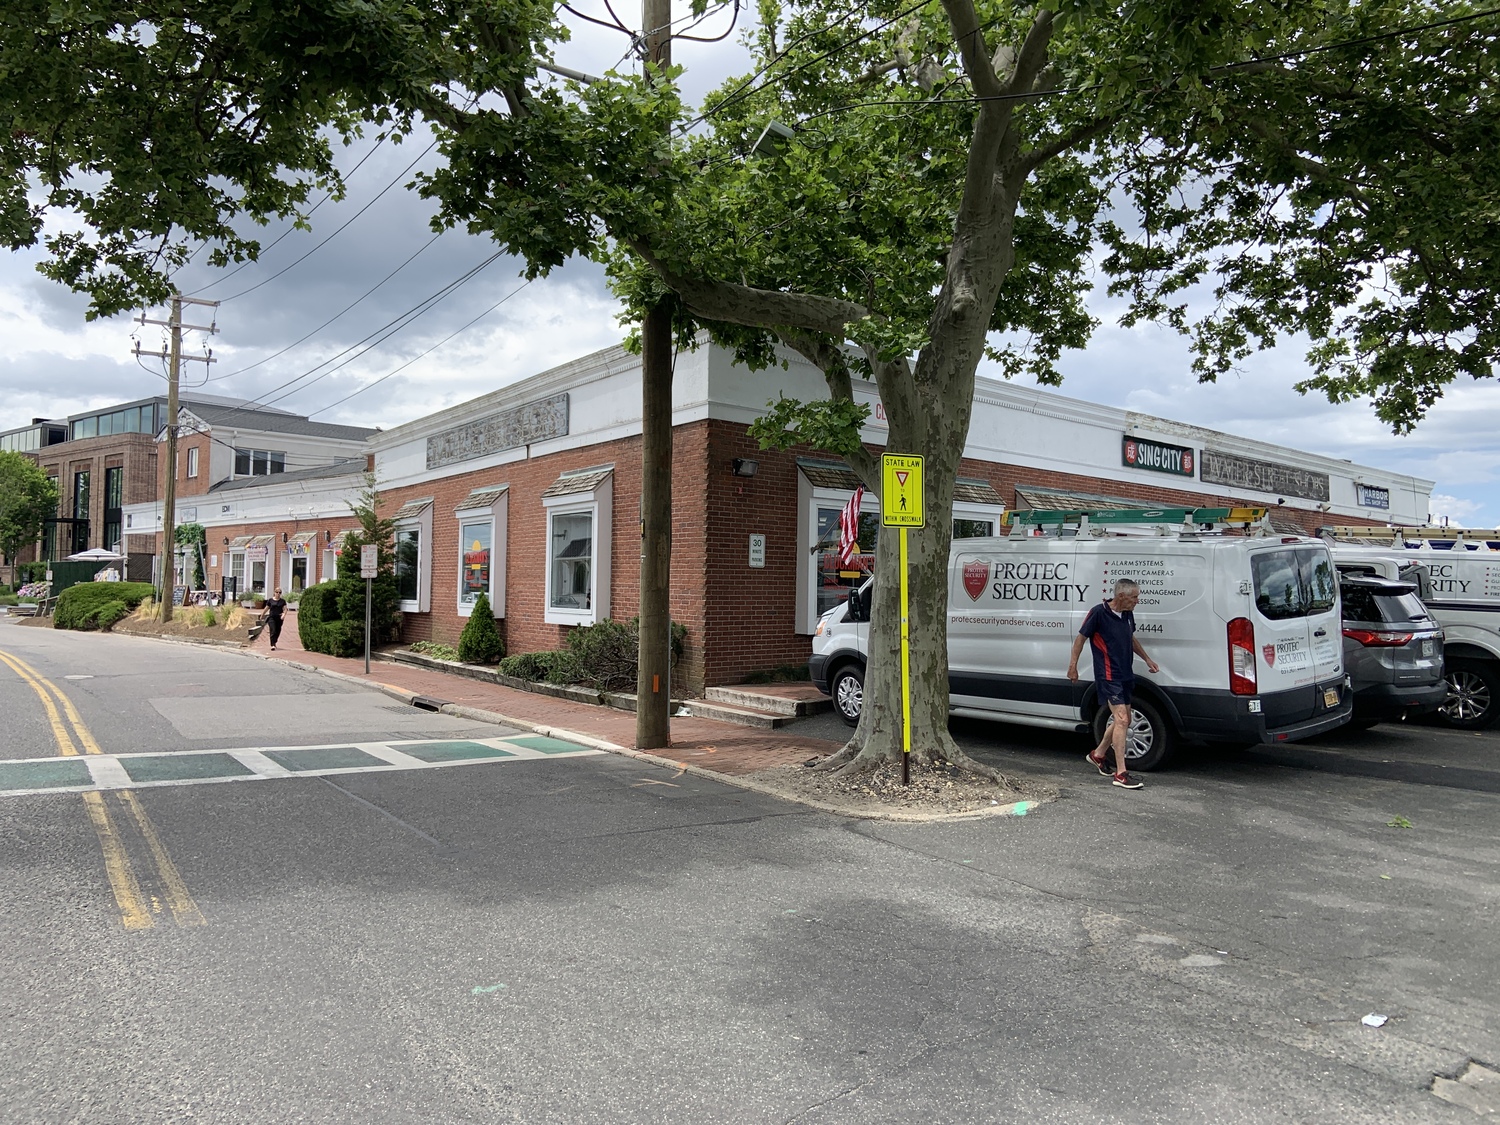 The former 7-Eleven building in Sag Harbor is being marketed 